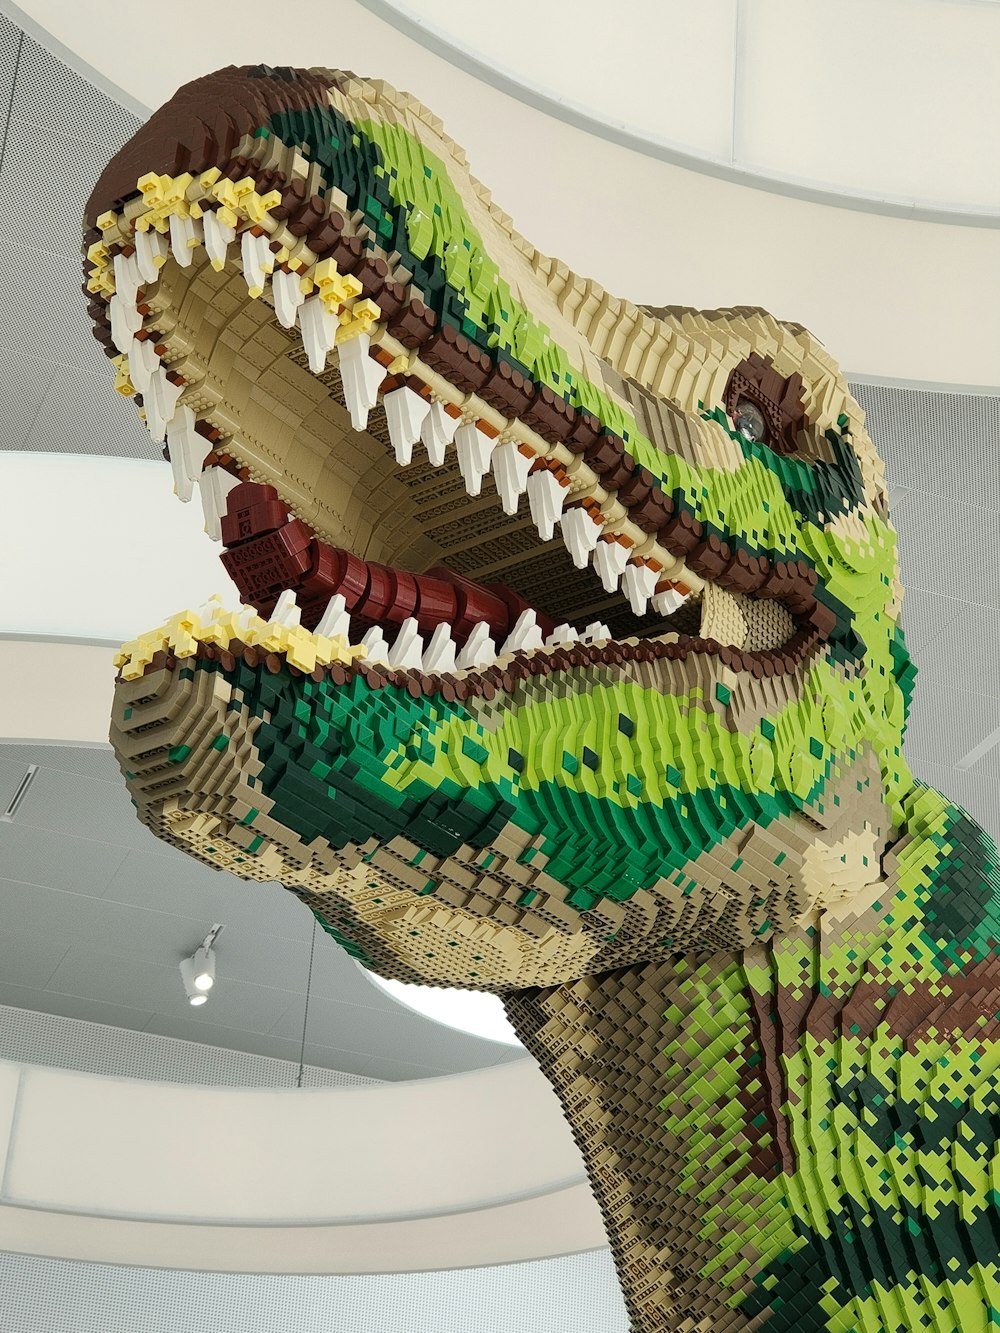 a close up of a lego model of a dinosaur